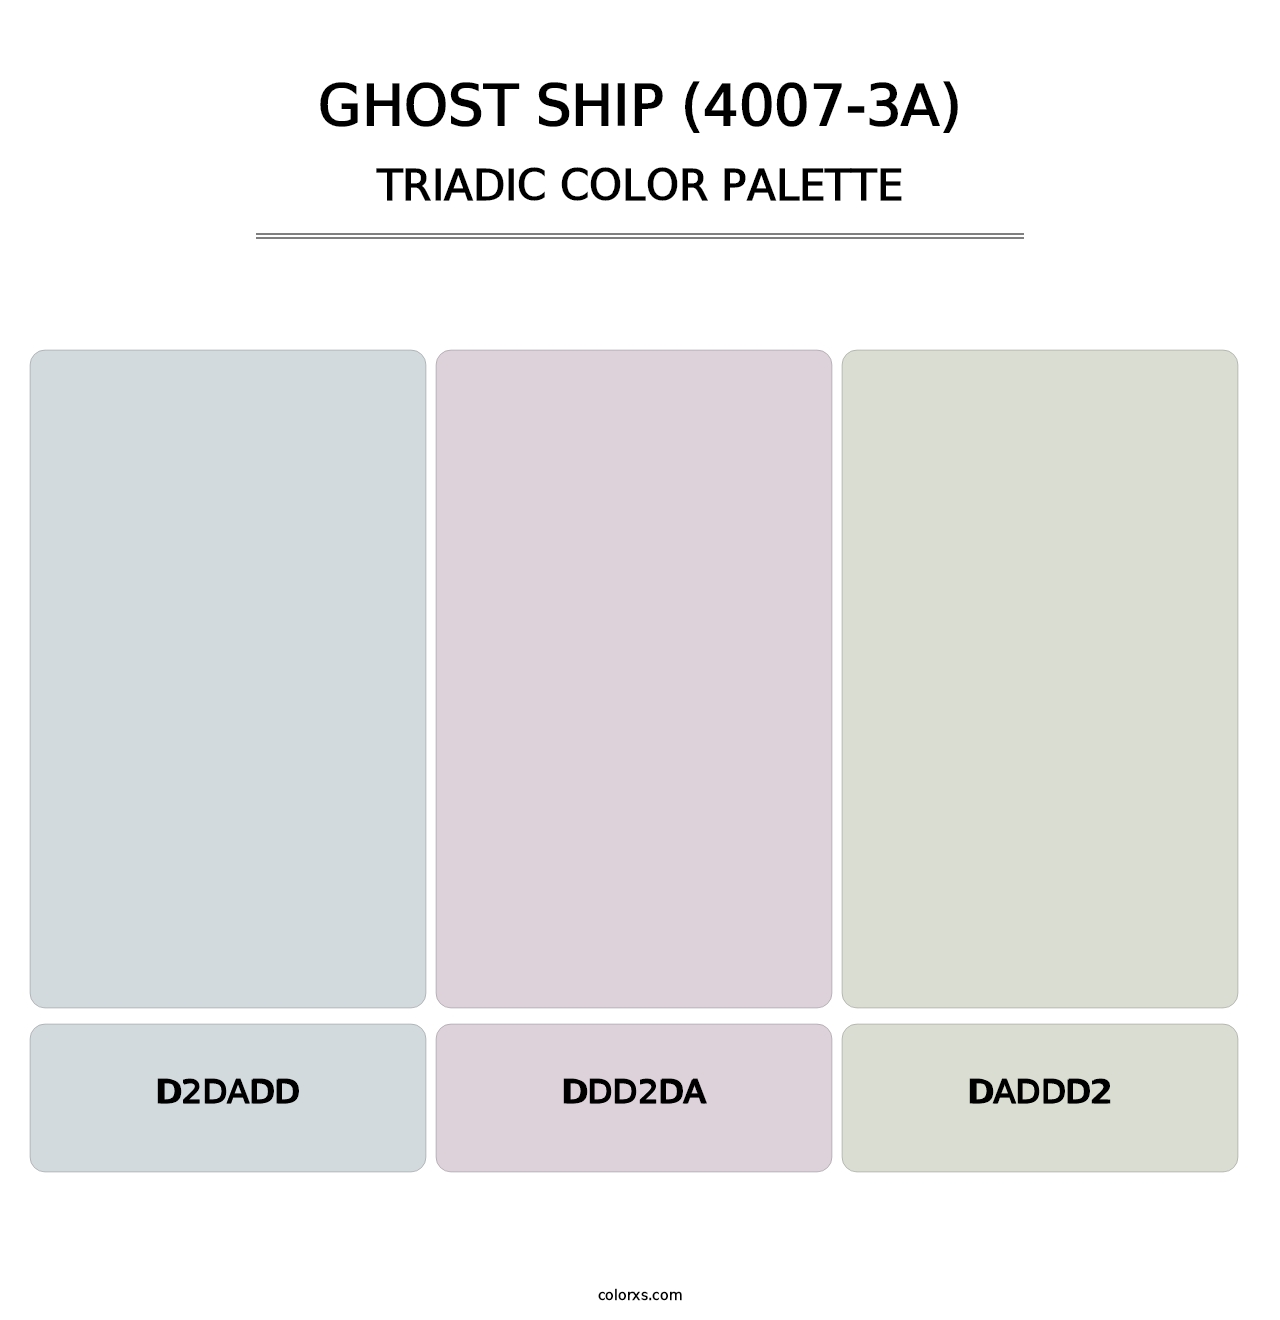 Ghost Ship (4007-3A) - Triadic Color Palette